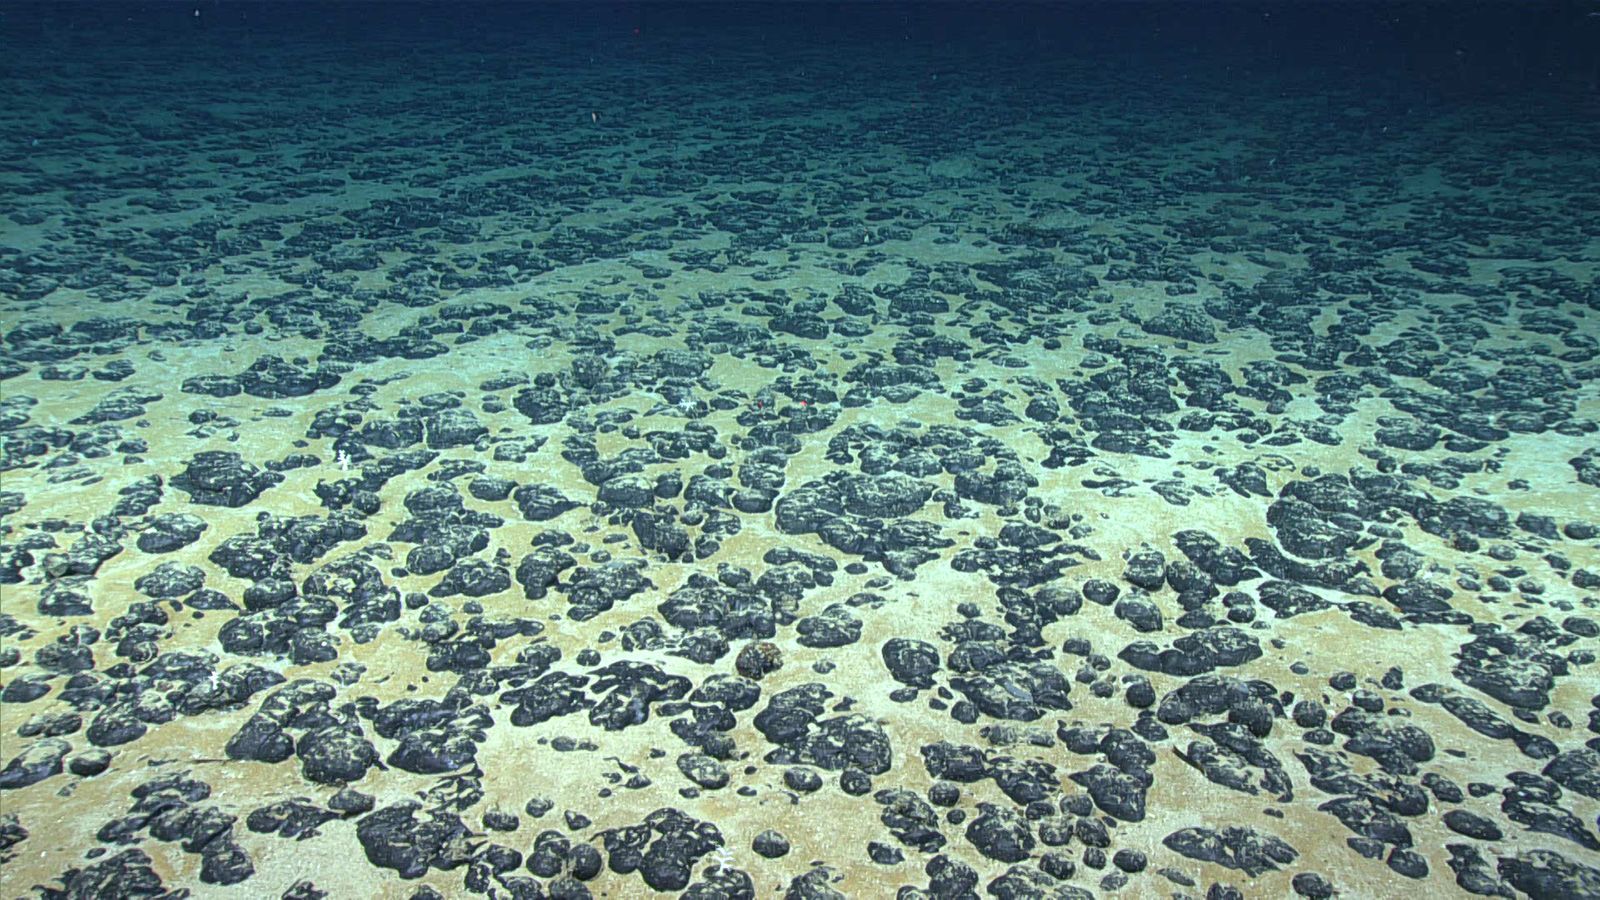 What's at the bottom of the ocean? A brief history of deep sea exploration